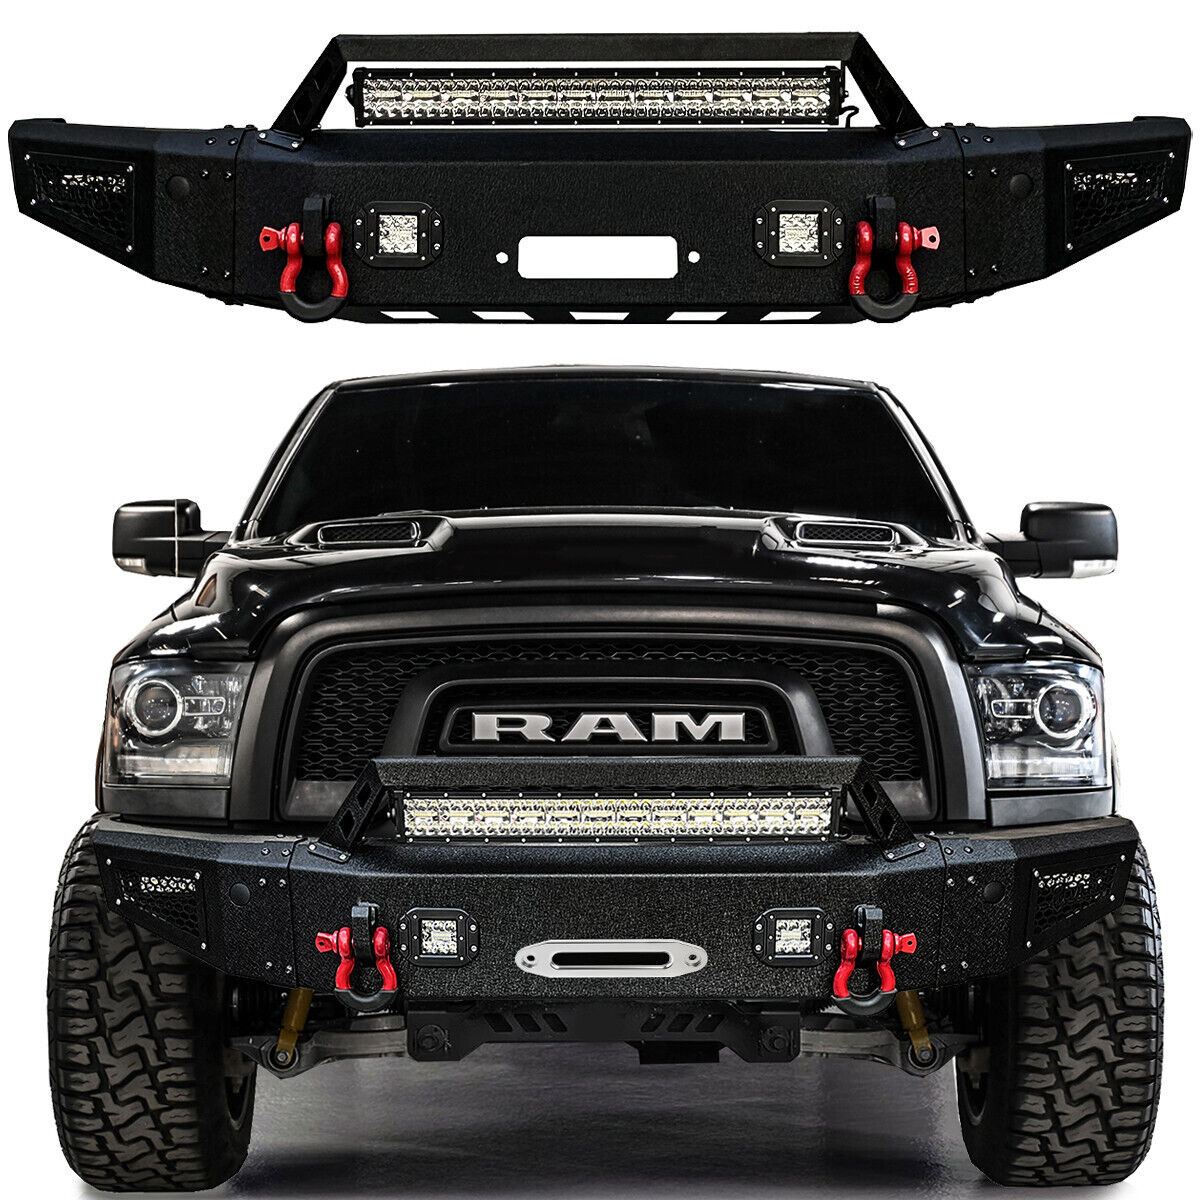 Vijay Fits 2015-2018 Ram 1500 Rebel Front Bumper Textured Steel with Winch Seat